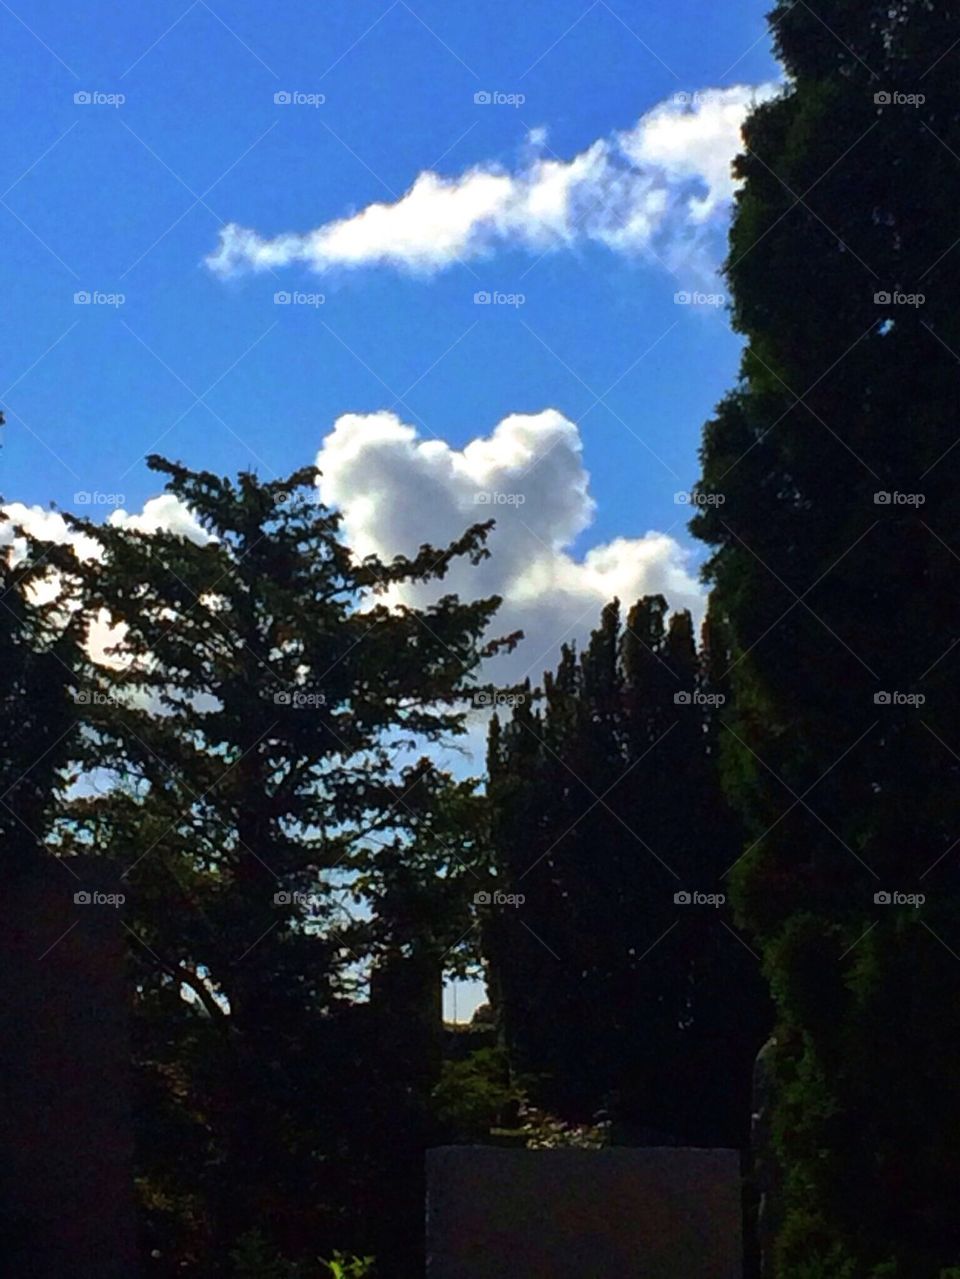 Love is in the air. Clouds like a heart
